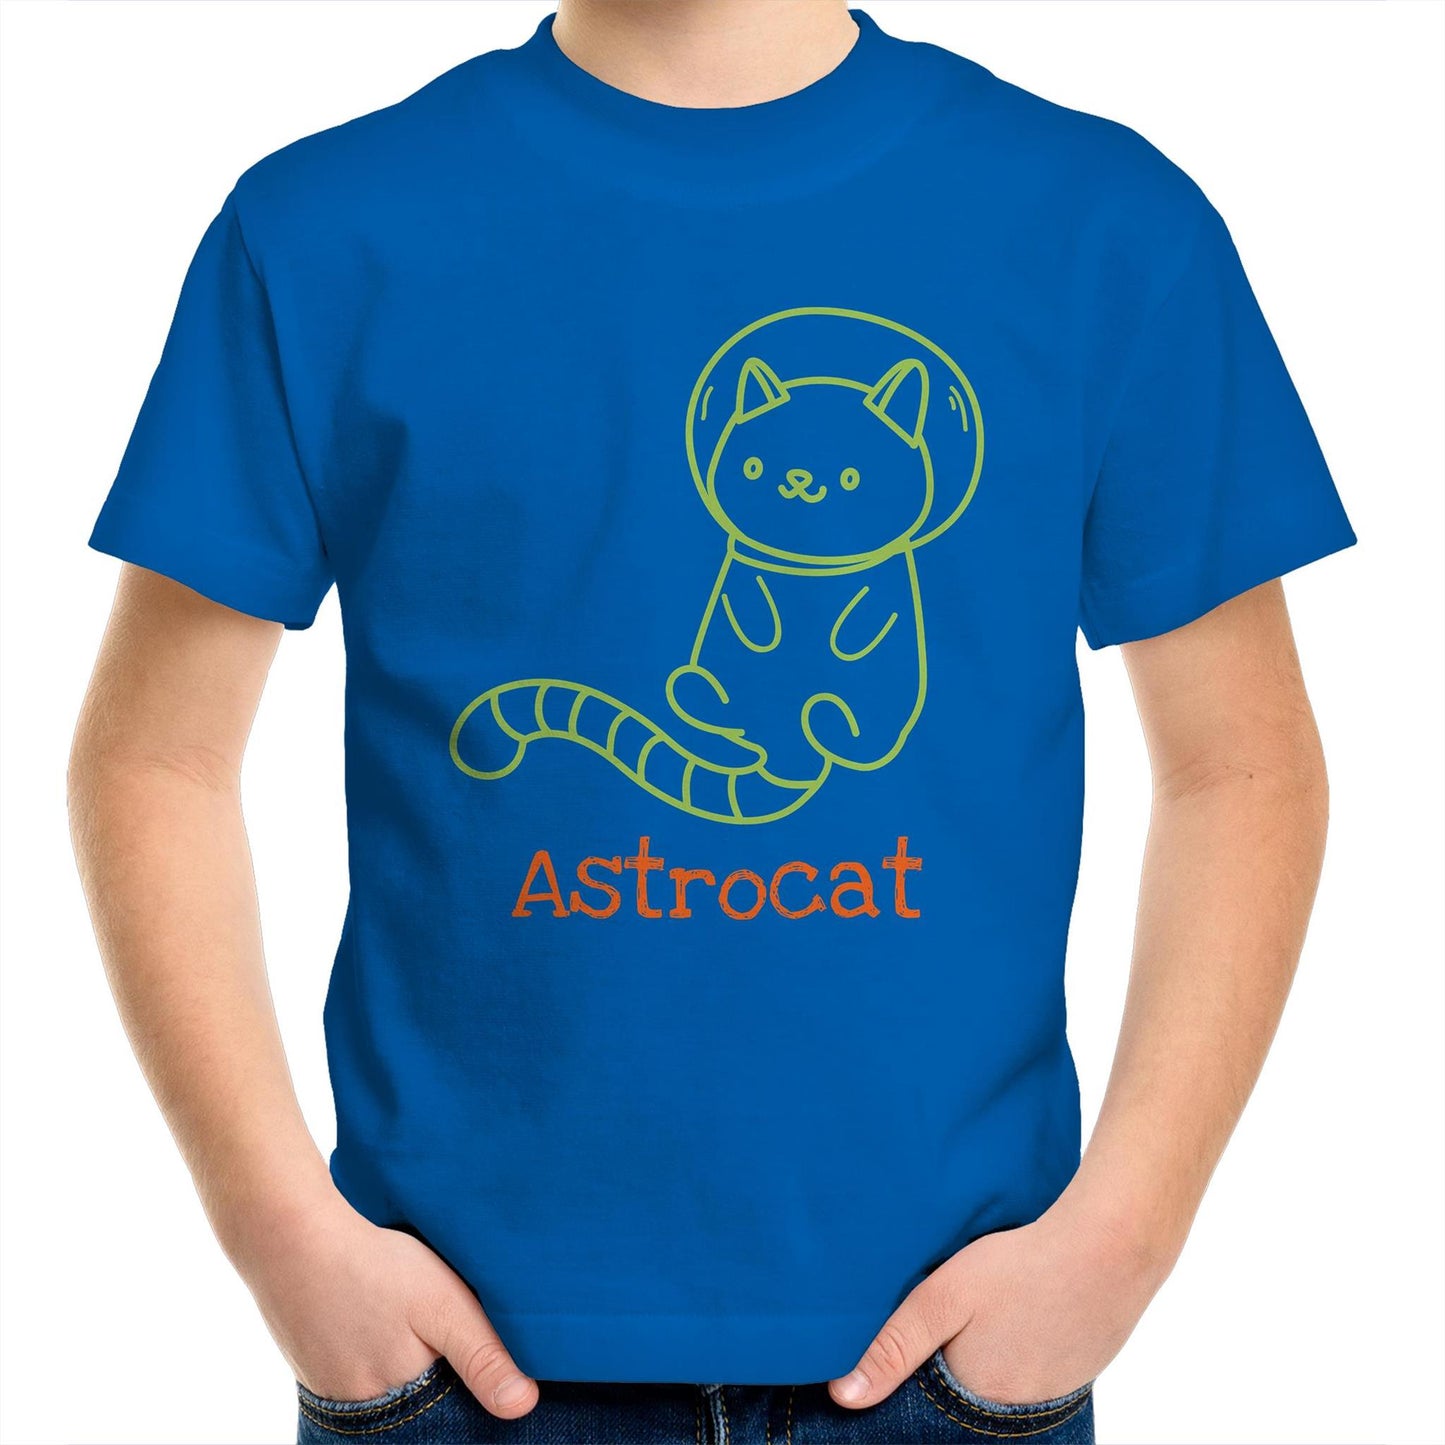 Astrocat - Kids Youth Crew T-Shirt Bright Royal Kids Youth T-shirt animal Funny Space